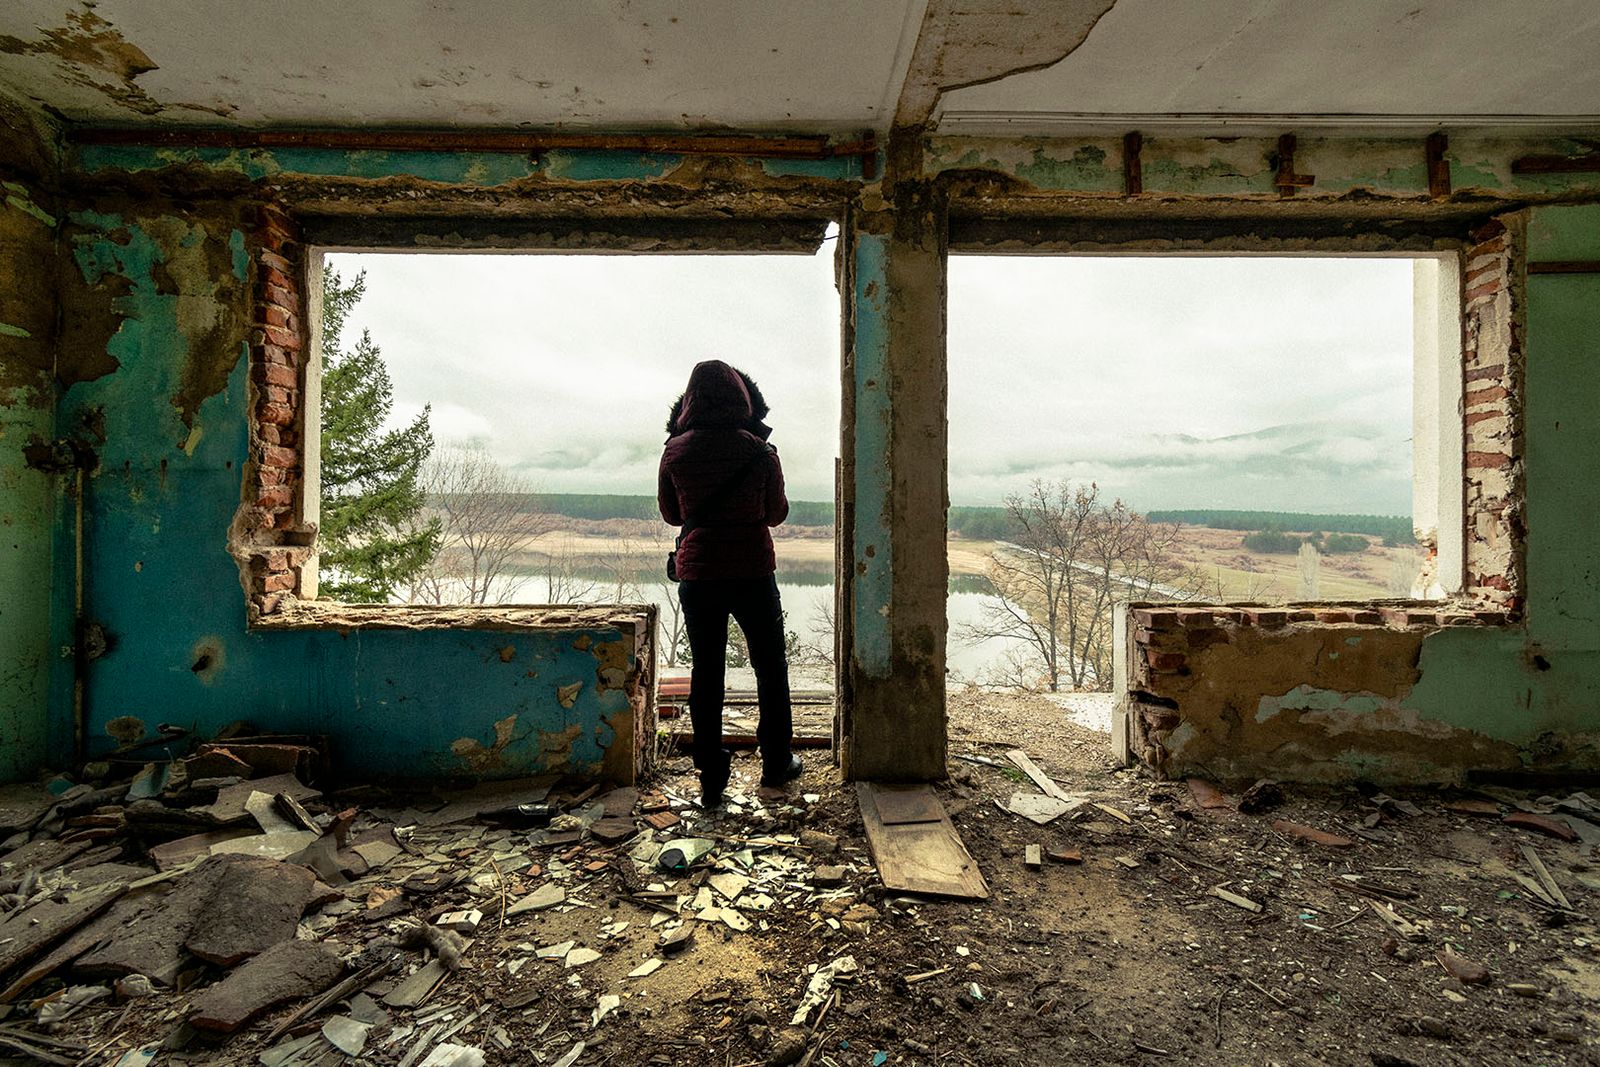 © Meri Boshkoska - Image from the THE MYSTERY OF ABANDONED PLACES photography project